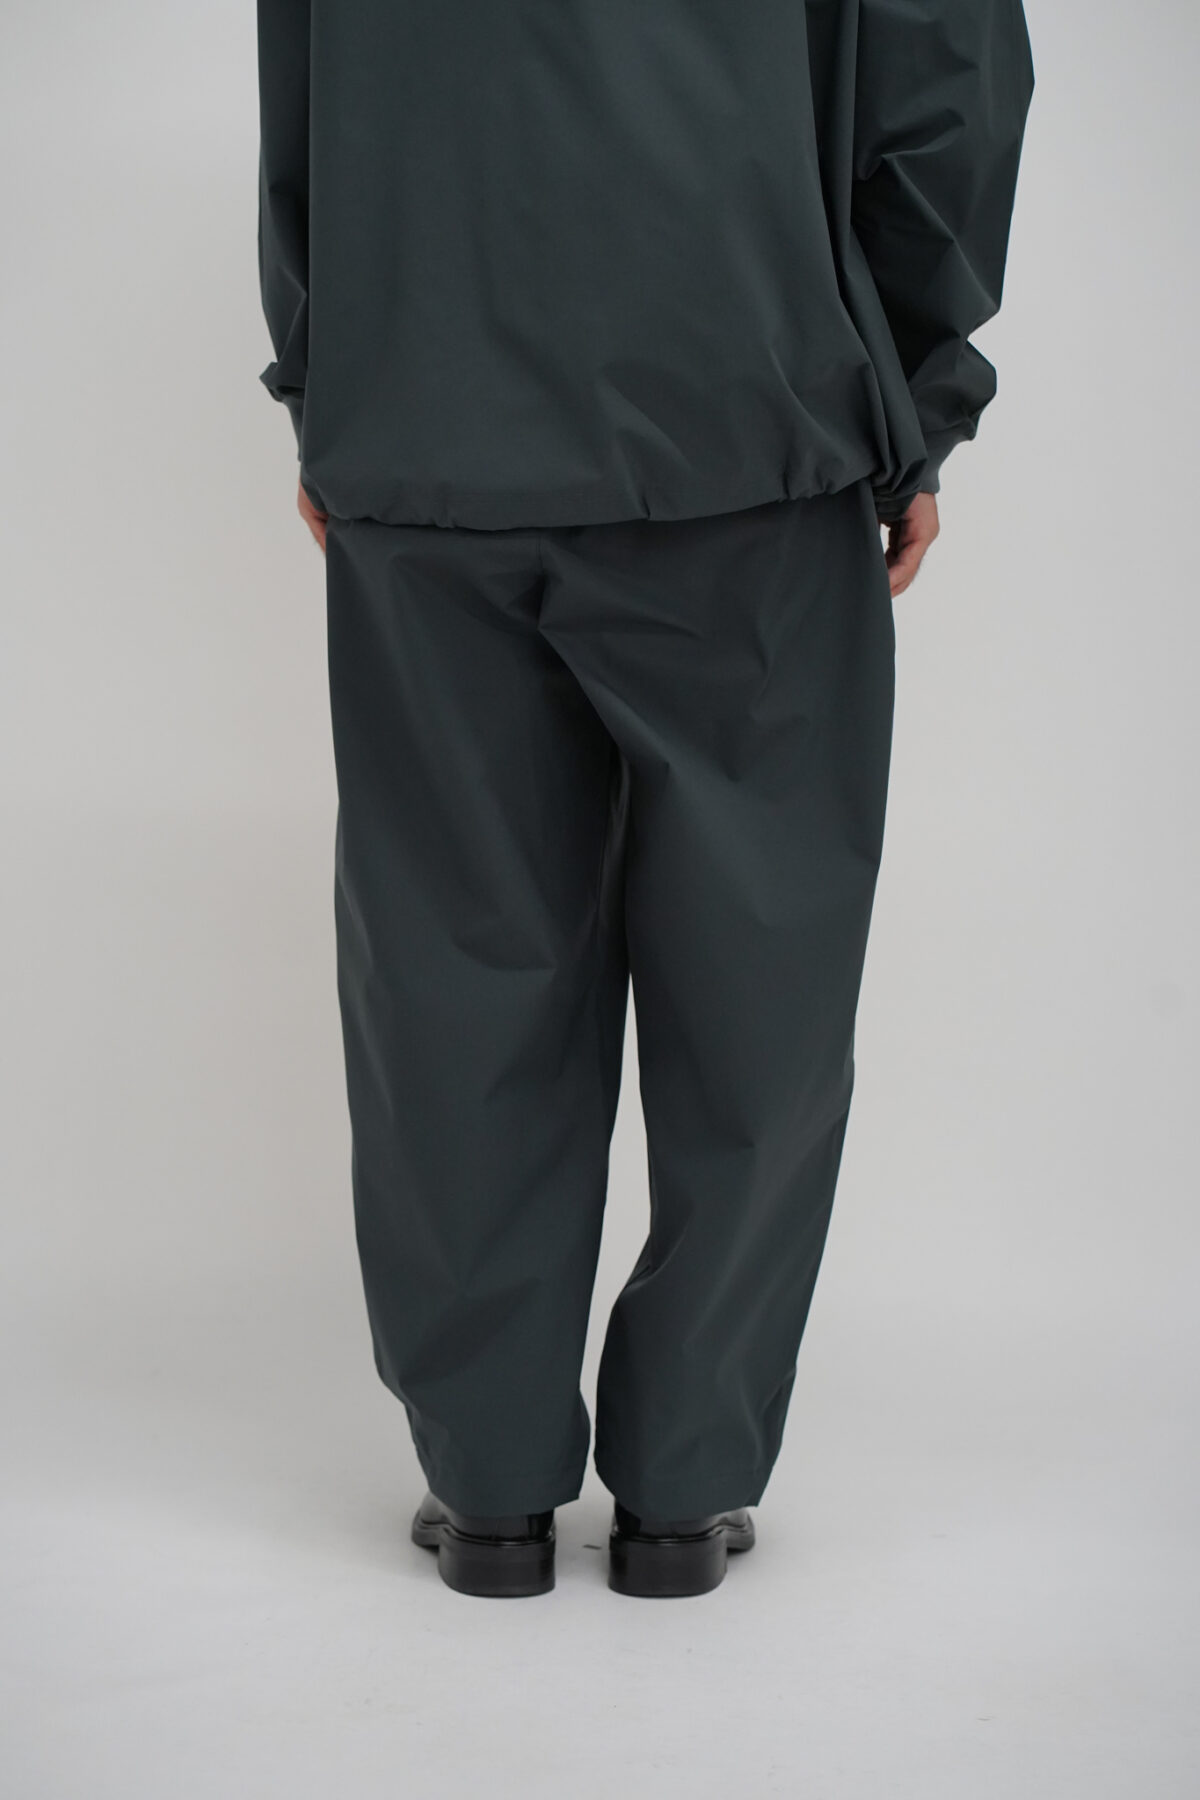 UNTRACE BASIC TAPERED STRETCH TRACK PANTS MF | FUDGE UP NOTHING